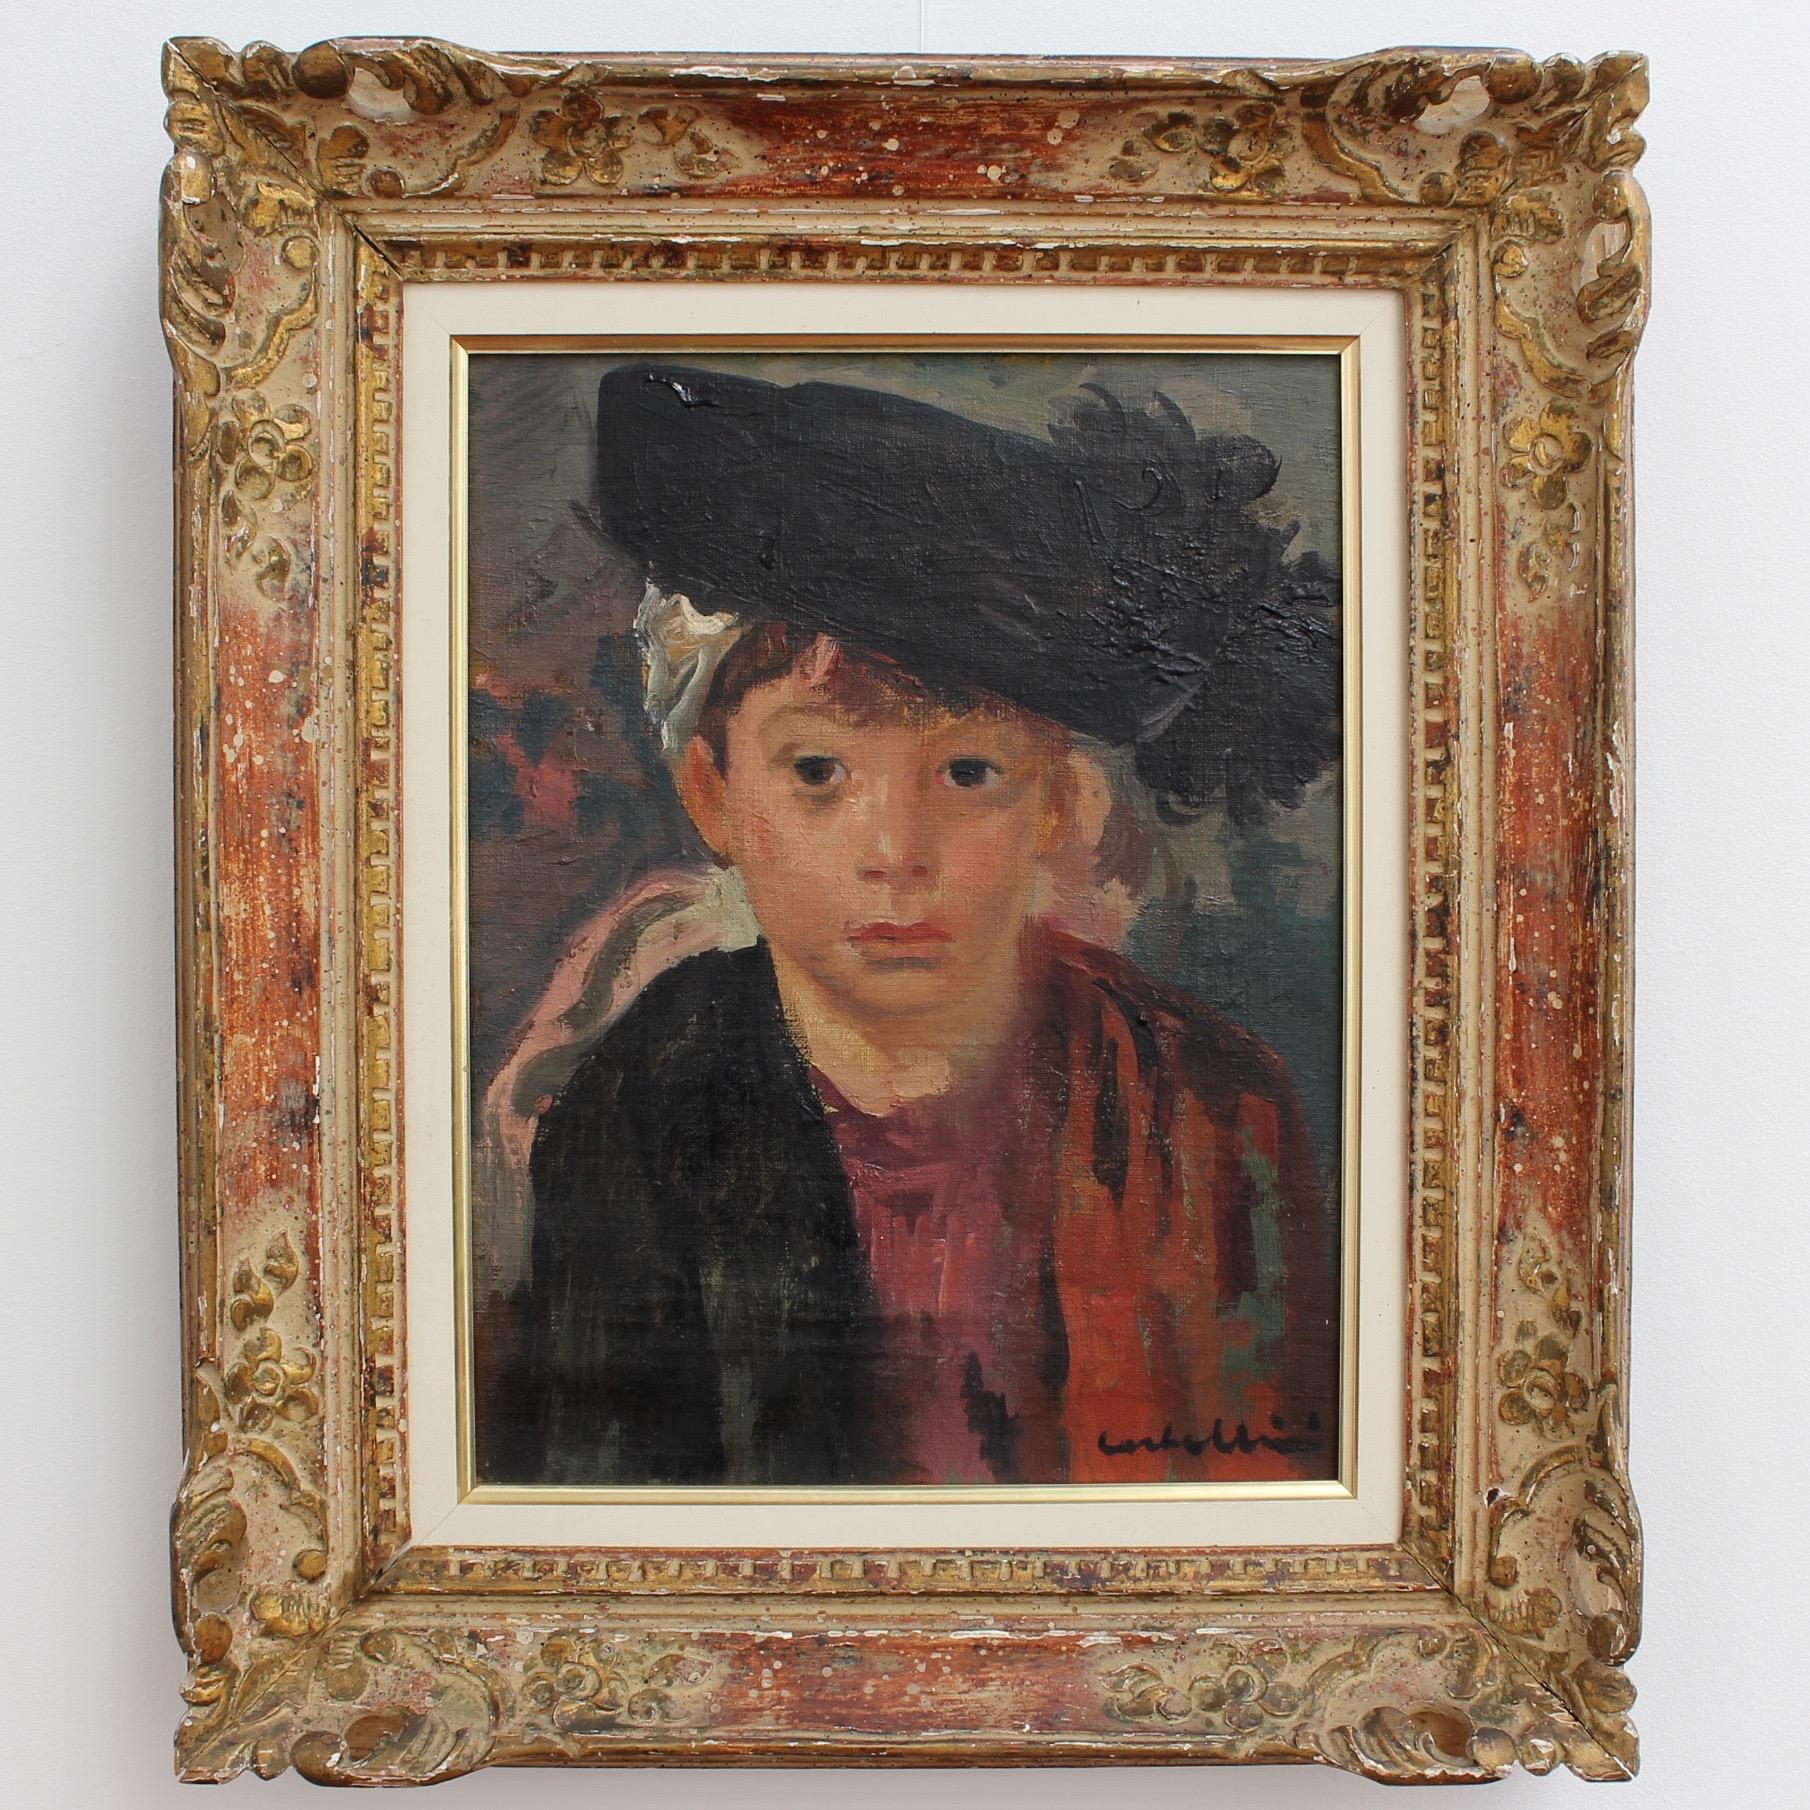 'Portrait of Boy in Feathered Cap' by Luigi Corbellini (circa 1930s). An endearing depiction of an enchanting young boy dressed in his smart clothing. Perhaps the slightly bemused expression on his face ensues from his curiosity as to why his day is